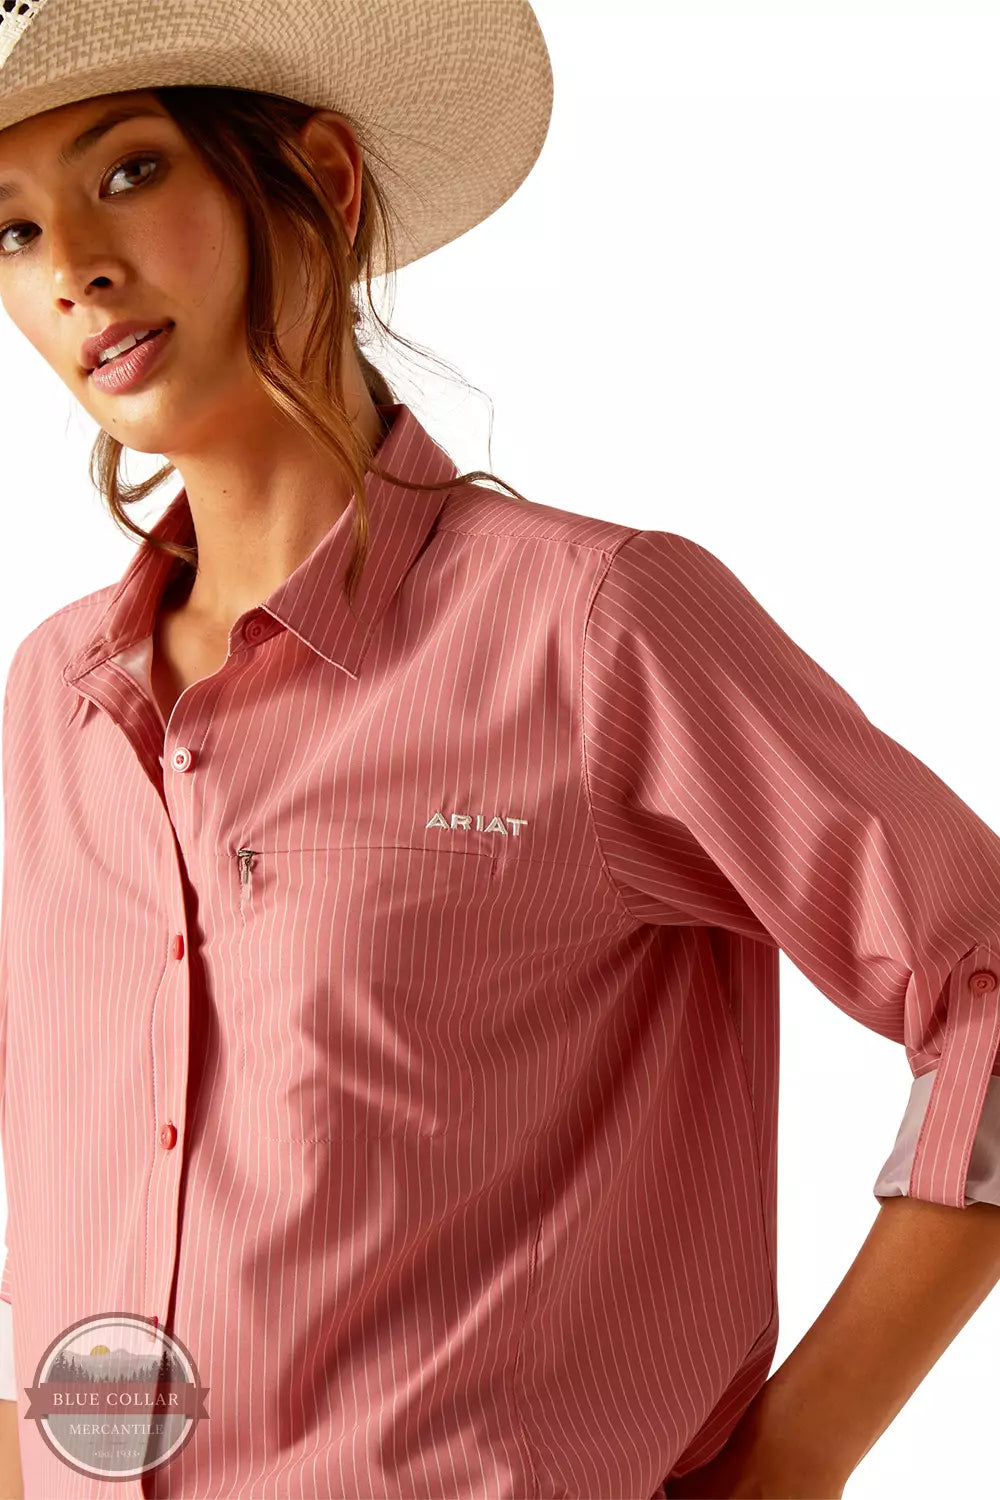 Ariat 10048858 VentTEK Stretch Long Sleeve Shirt in Faded Rose Pinstripe Front Detail View